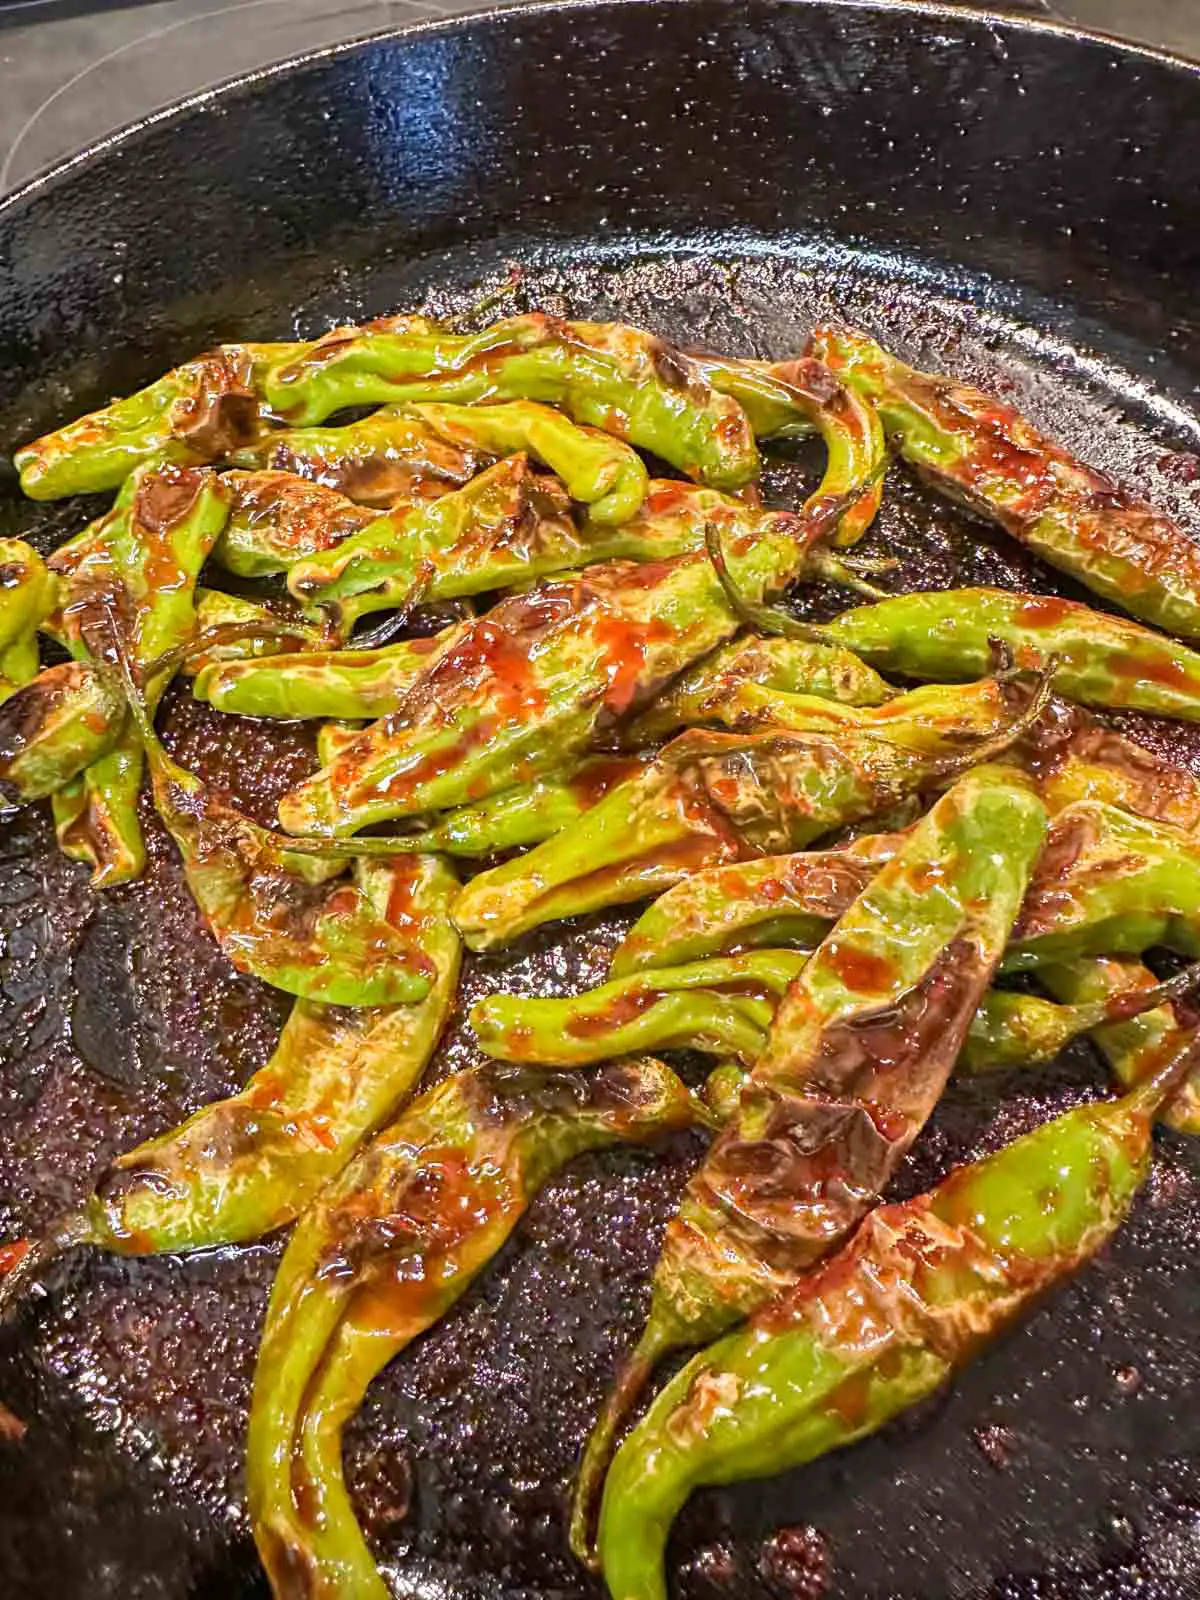 Blistered shishito peppers cooked with a spicy gochujang sauce in a cast iron pan.